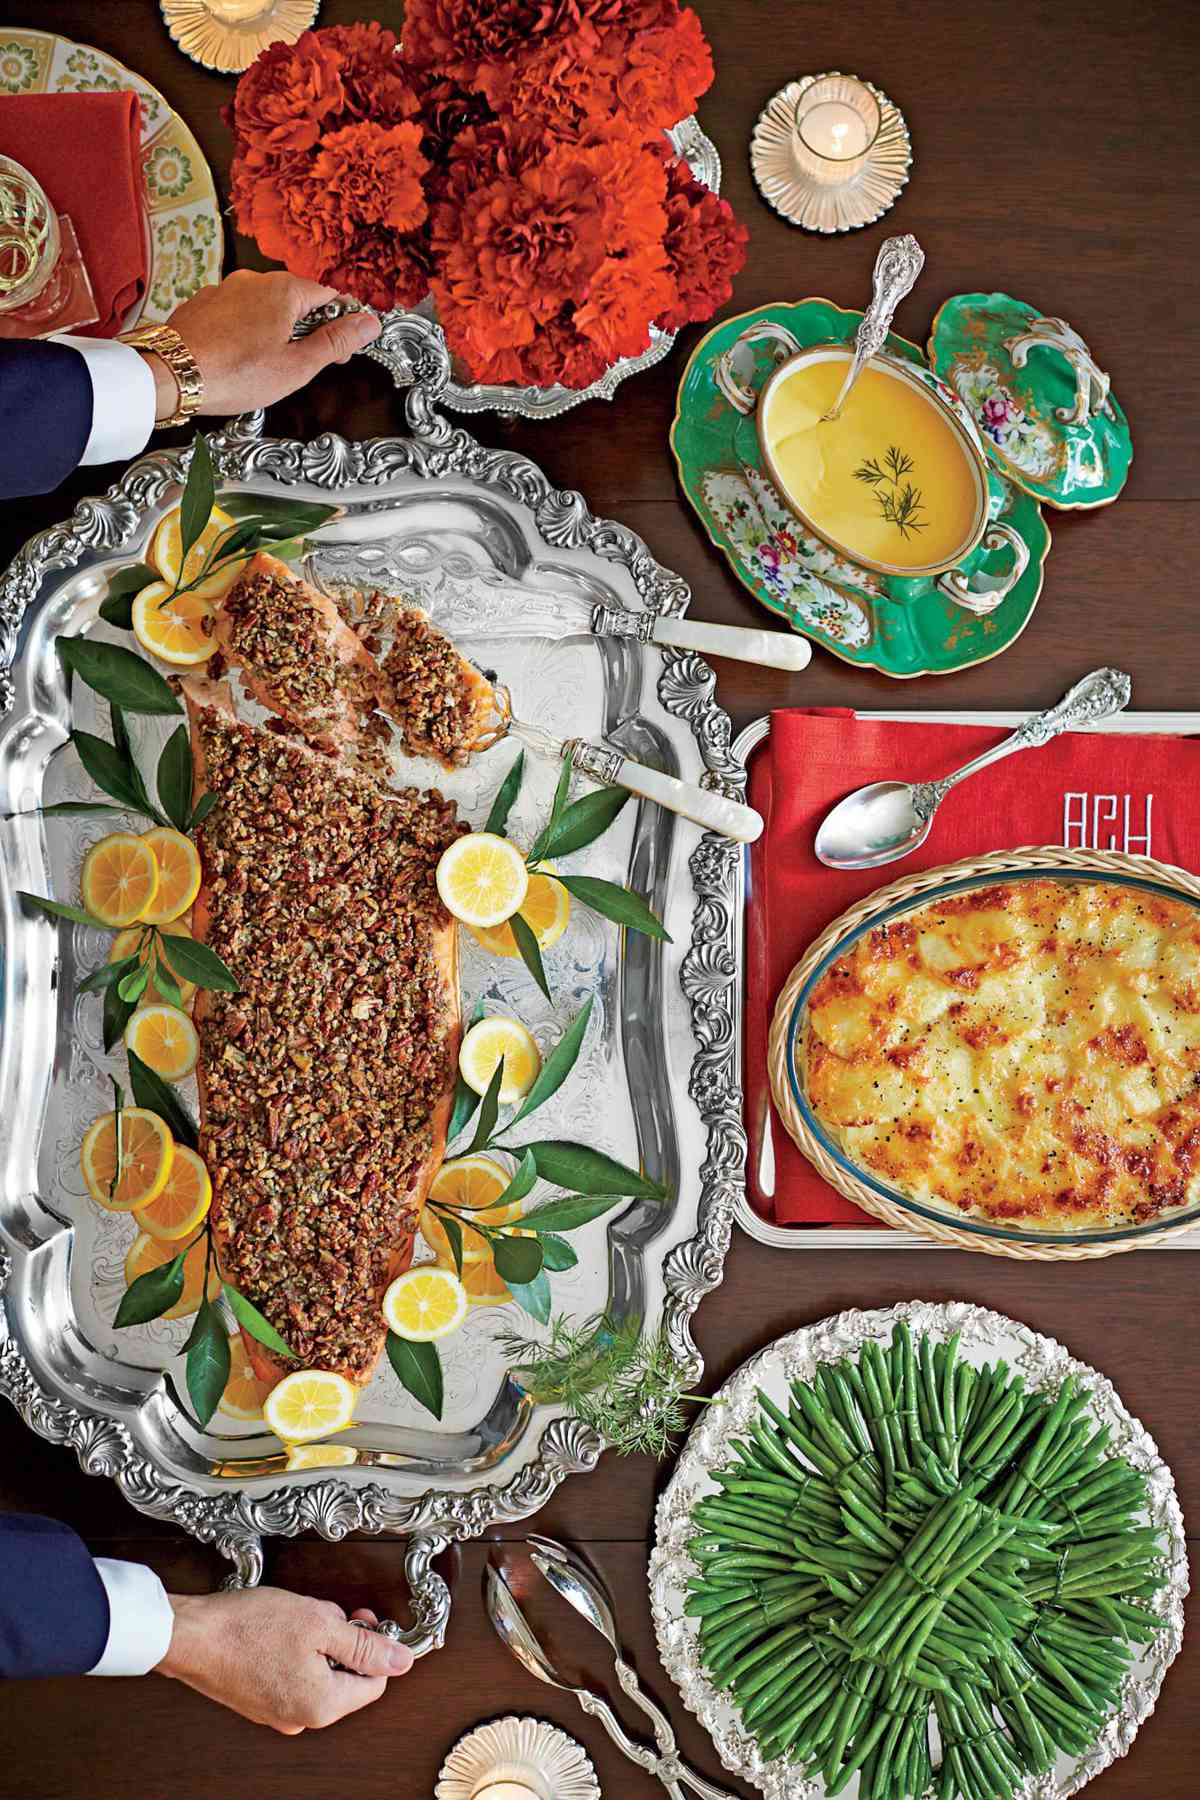 Pecan-and-Dill-Crusted Salmon